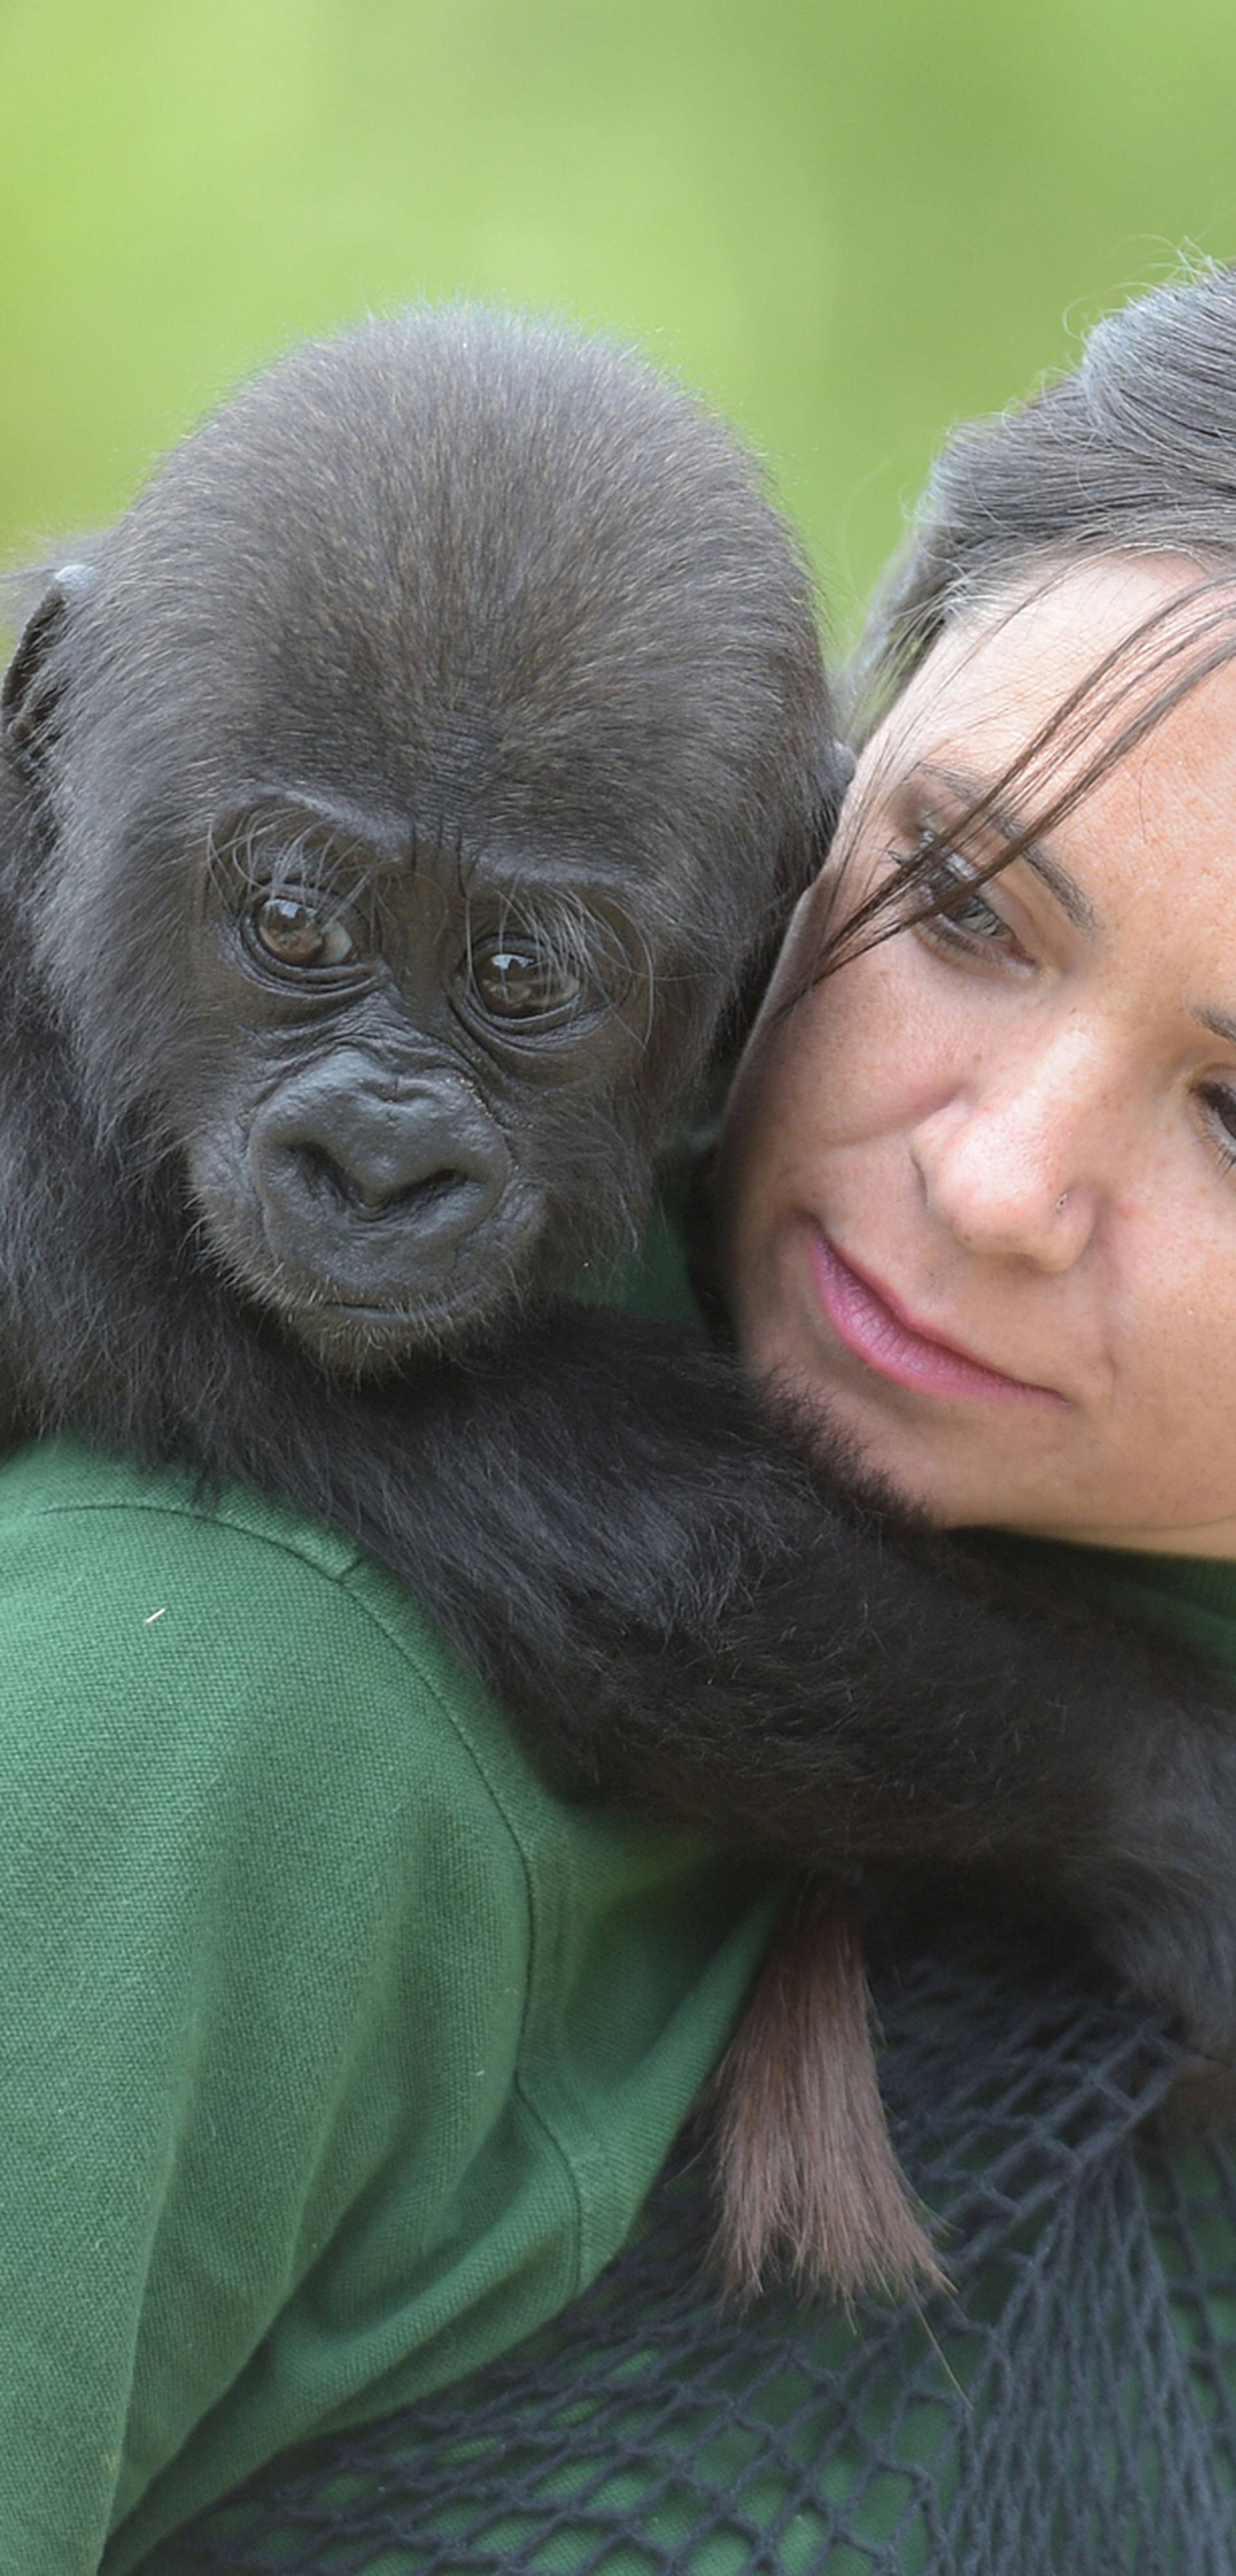 Baby gorilla plays with keeper at Bristol Zoo